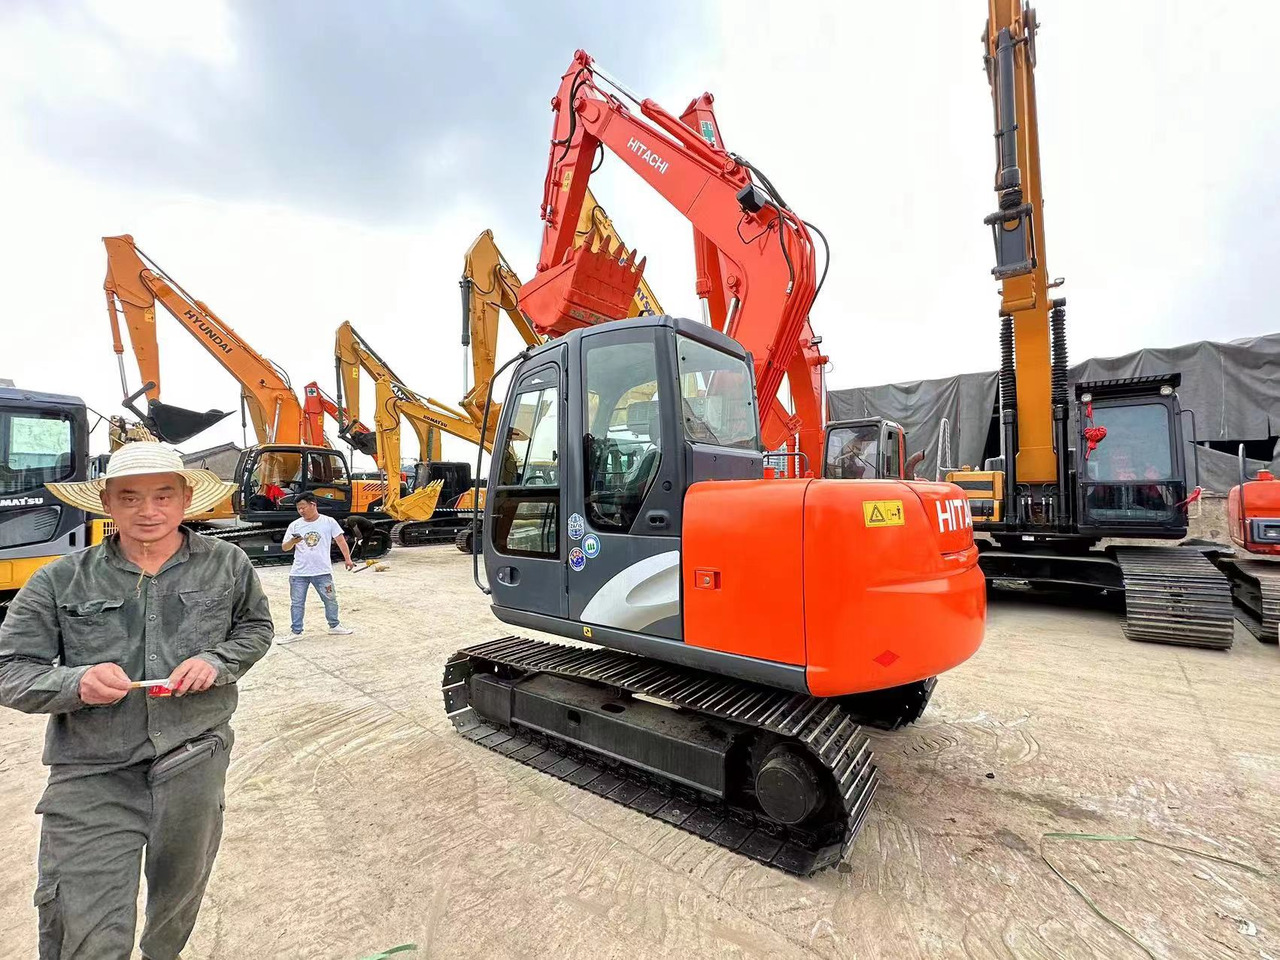 Máy xúc bánh xích 7 ton used excavator good condition Hitachi ZX70 Strong power with low working hours good working condition welcome to inquire: hình 4